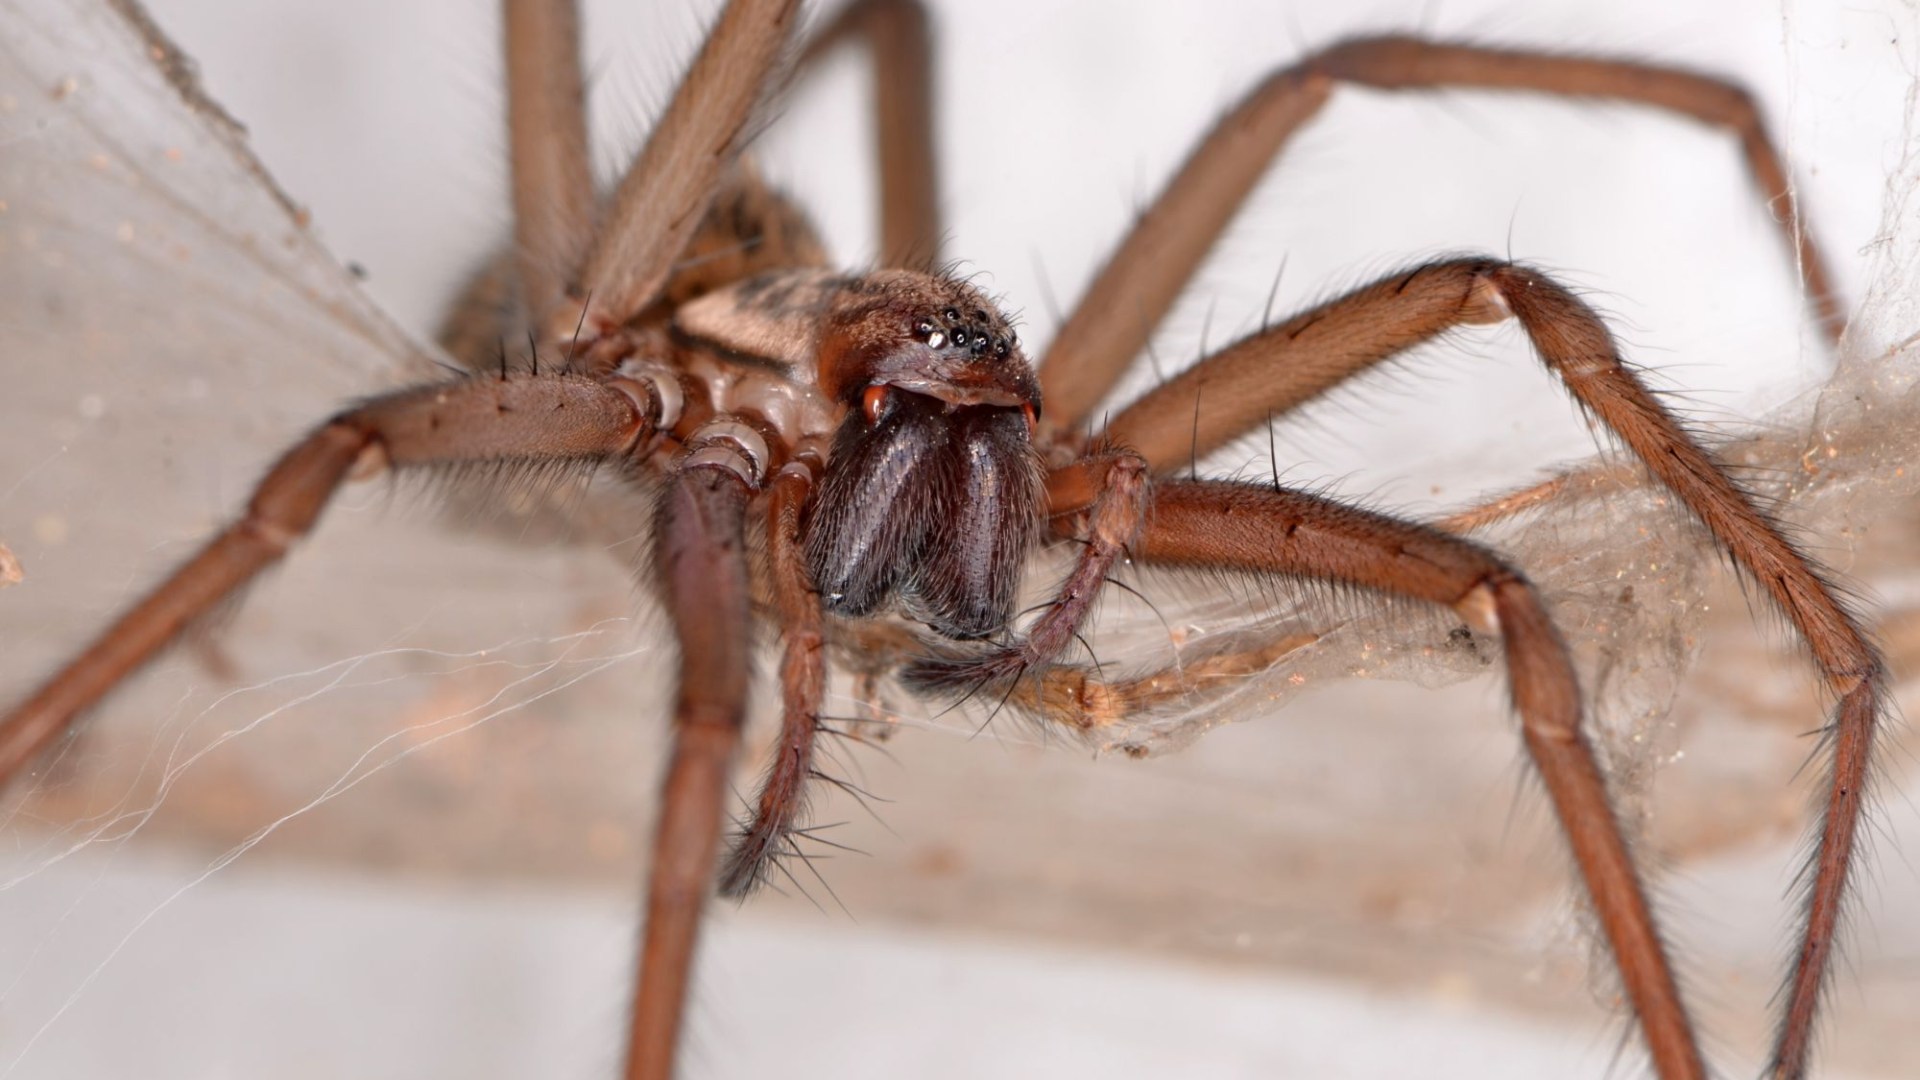 I’m a spider expert and these 7 common mistakes invite giant critters into your home… here’s how to get rid for good